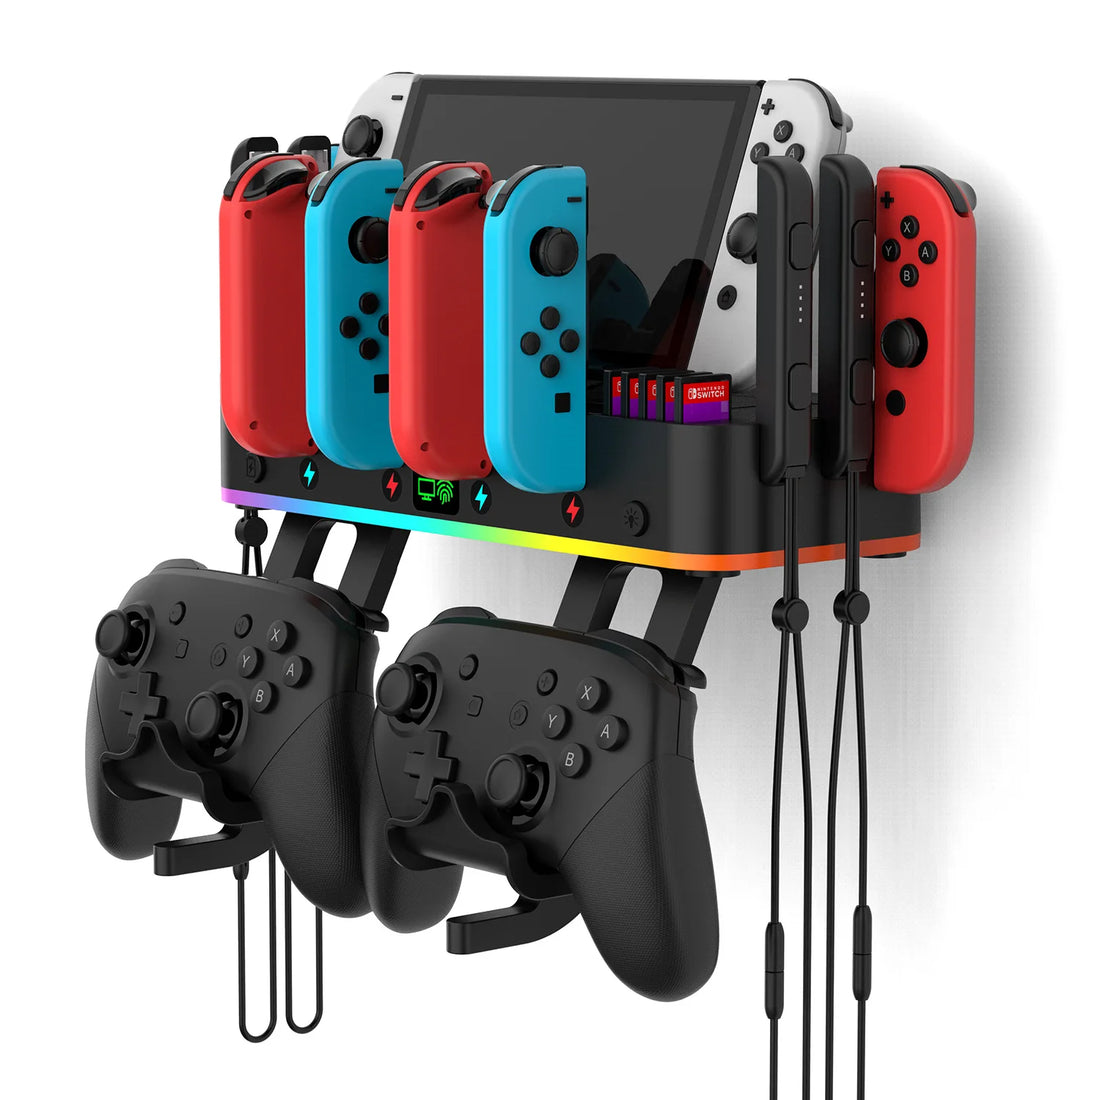 Nintendo Switch Dock Station & Wall Mount with RGB Charging Dock